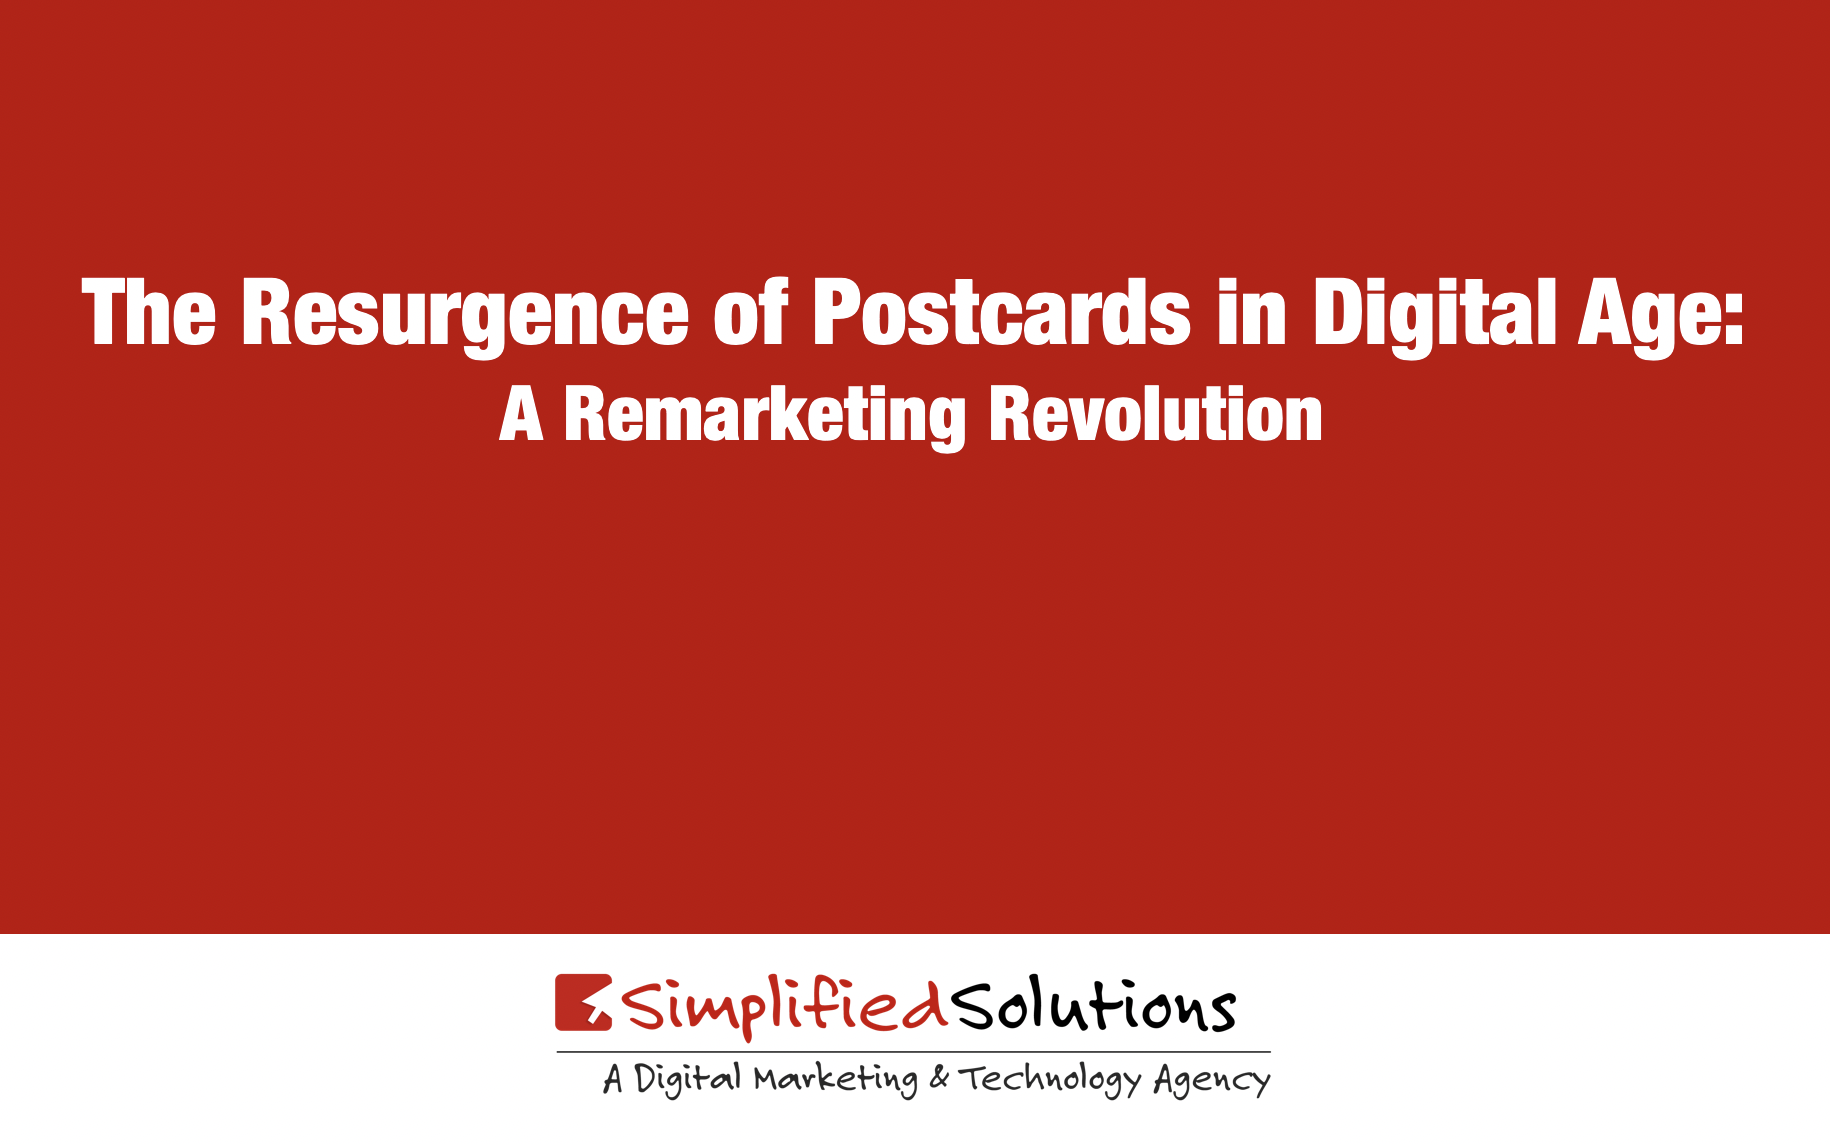 Digital-Marketing-Trends-Postcard-Remarketing-for-Lead-Generation-Simplified-Solutions.png